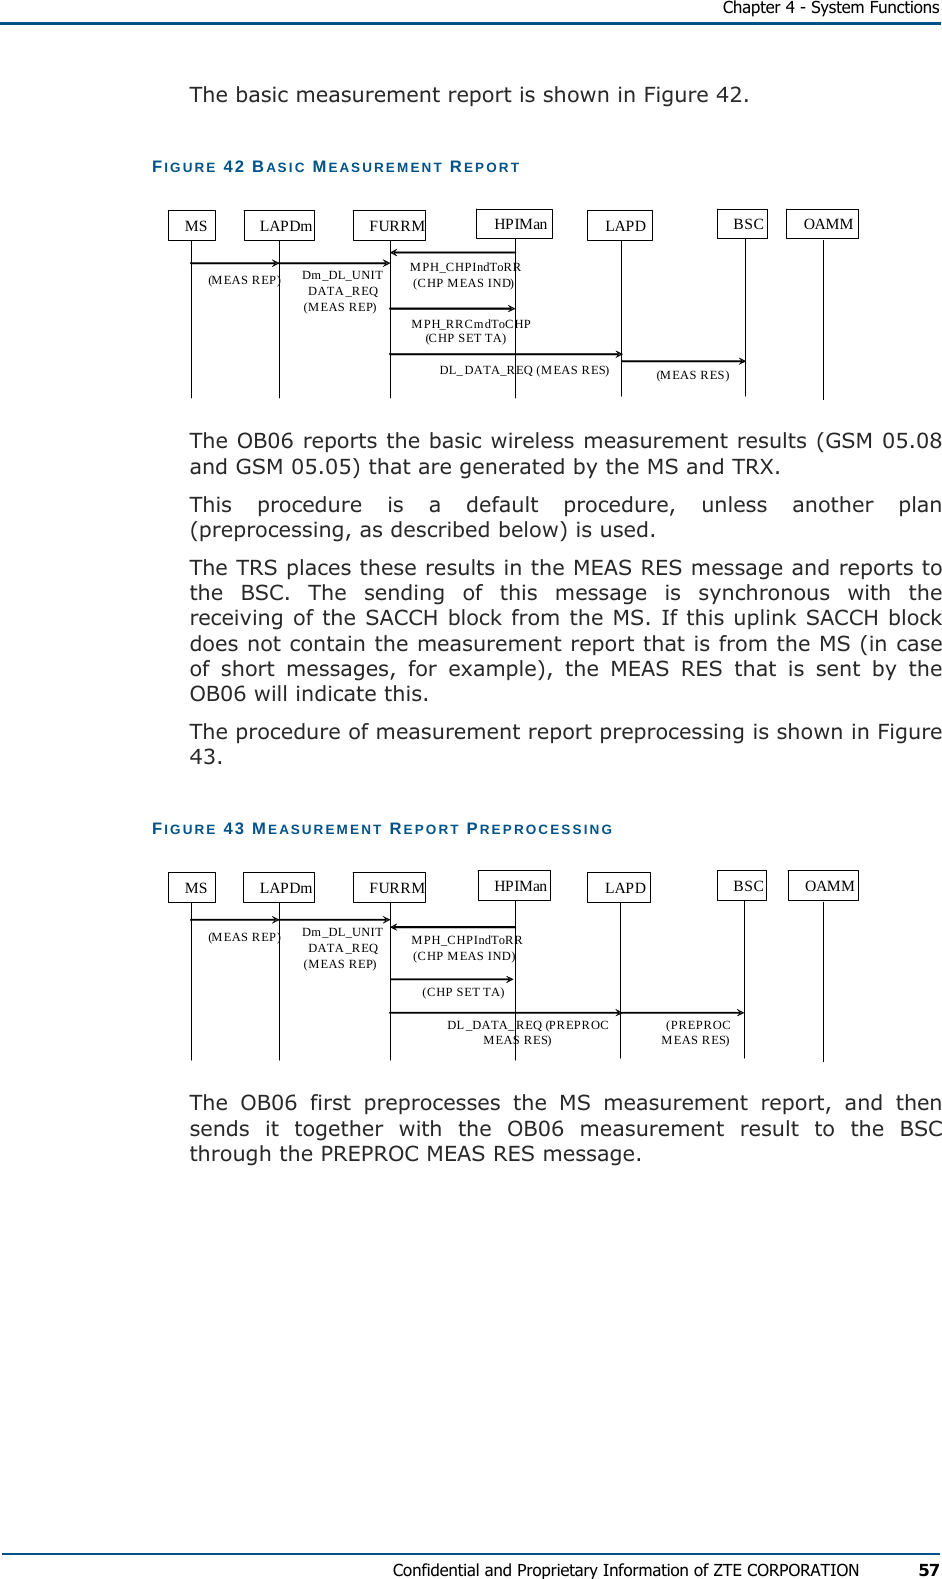   Chapter 4 - System Functions Confidential and Proprietary Information of ZTE CORPORATION 57 The basic measurement report is shown in Figure 42. FIGURE 42 BASIC MEASUREMENT REPORT MS LAPDm FURRM HPIMan LAPD BSC OAMMDm_DL_UNIT DATA_REQ (MEAS REP)(MEAS REP)DL_DATA_REQ (MEAS RES) (MEAS RES) MPH_CHPIndToRR (CHP MEAS IND)MPH_RRCmdToCHP (C HP S ET TA) The OB06 reports the basic wireless measurement results (GSM 05.08 and GSM 05.05) that are generated by the MS and TRX. This procedure is a default procedure, unless another plan (preprocessing, as described below) is used. The TRS places these results in the MEAS RES message and reports to the BSC. The sending of this message is synchronous with the receiving of the SACCH block from the MS. If this uplink SACCH block does not contain the measurement report that is from the MS (in case of short messages, for example), the MEAS RES that is sent by the OB06 will indicate this. The procedure of measurement report preprocessing is shown in Figure 43. FIGURE 43 MEASUREMENT REPORT PREPROCESSING MS LAPDm FURRM HPIMan LAPD BSC OAMMDm_DL_UNIT DATA_REQ (MEAS REP)(MEAS REP)DL_DATA_REQ (PREPROC MEAS RES) (PREPROC  MEAS RES) MPH_CHPIndToRR (CHP MEAS IND)(CHP SET TA) The OB06 first preprocesses the MS measurement report, and then sends it together with the OB06 measurement result to the BSC through the PREPROC MEAS RES message. 